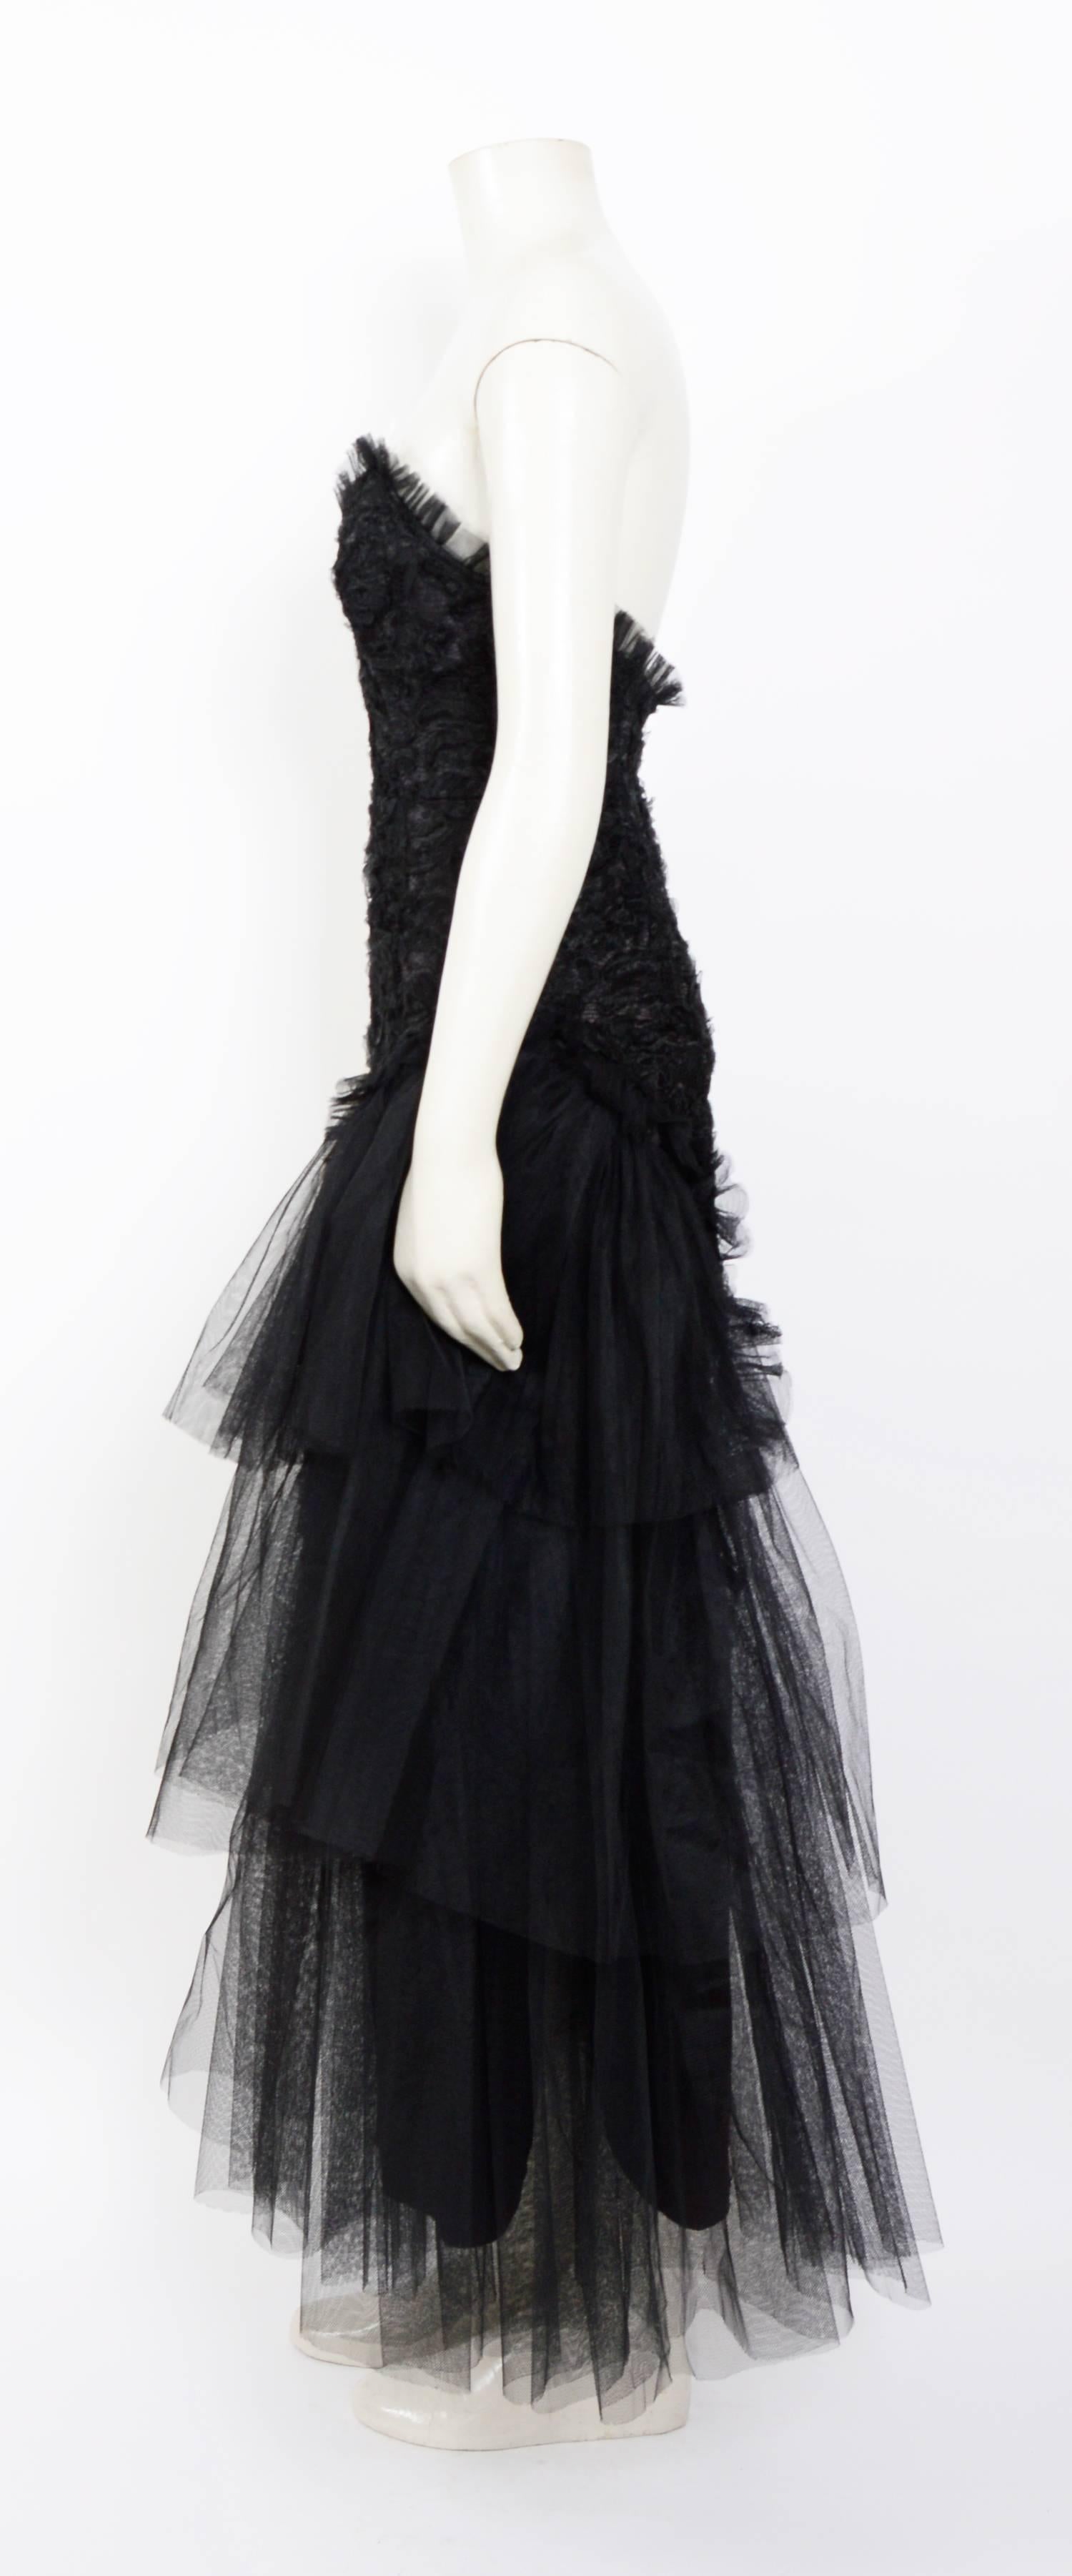 Women's Yvan & Marzia 1980s Black Lace and Tulle Partydress